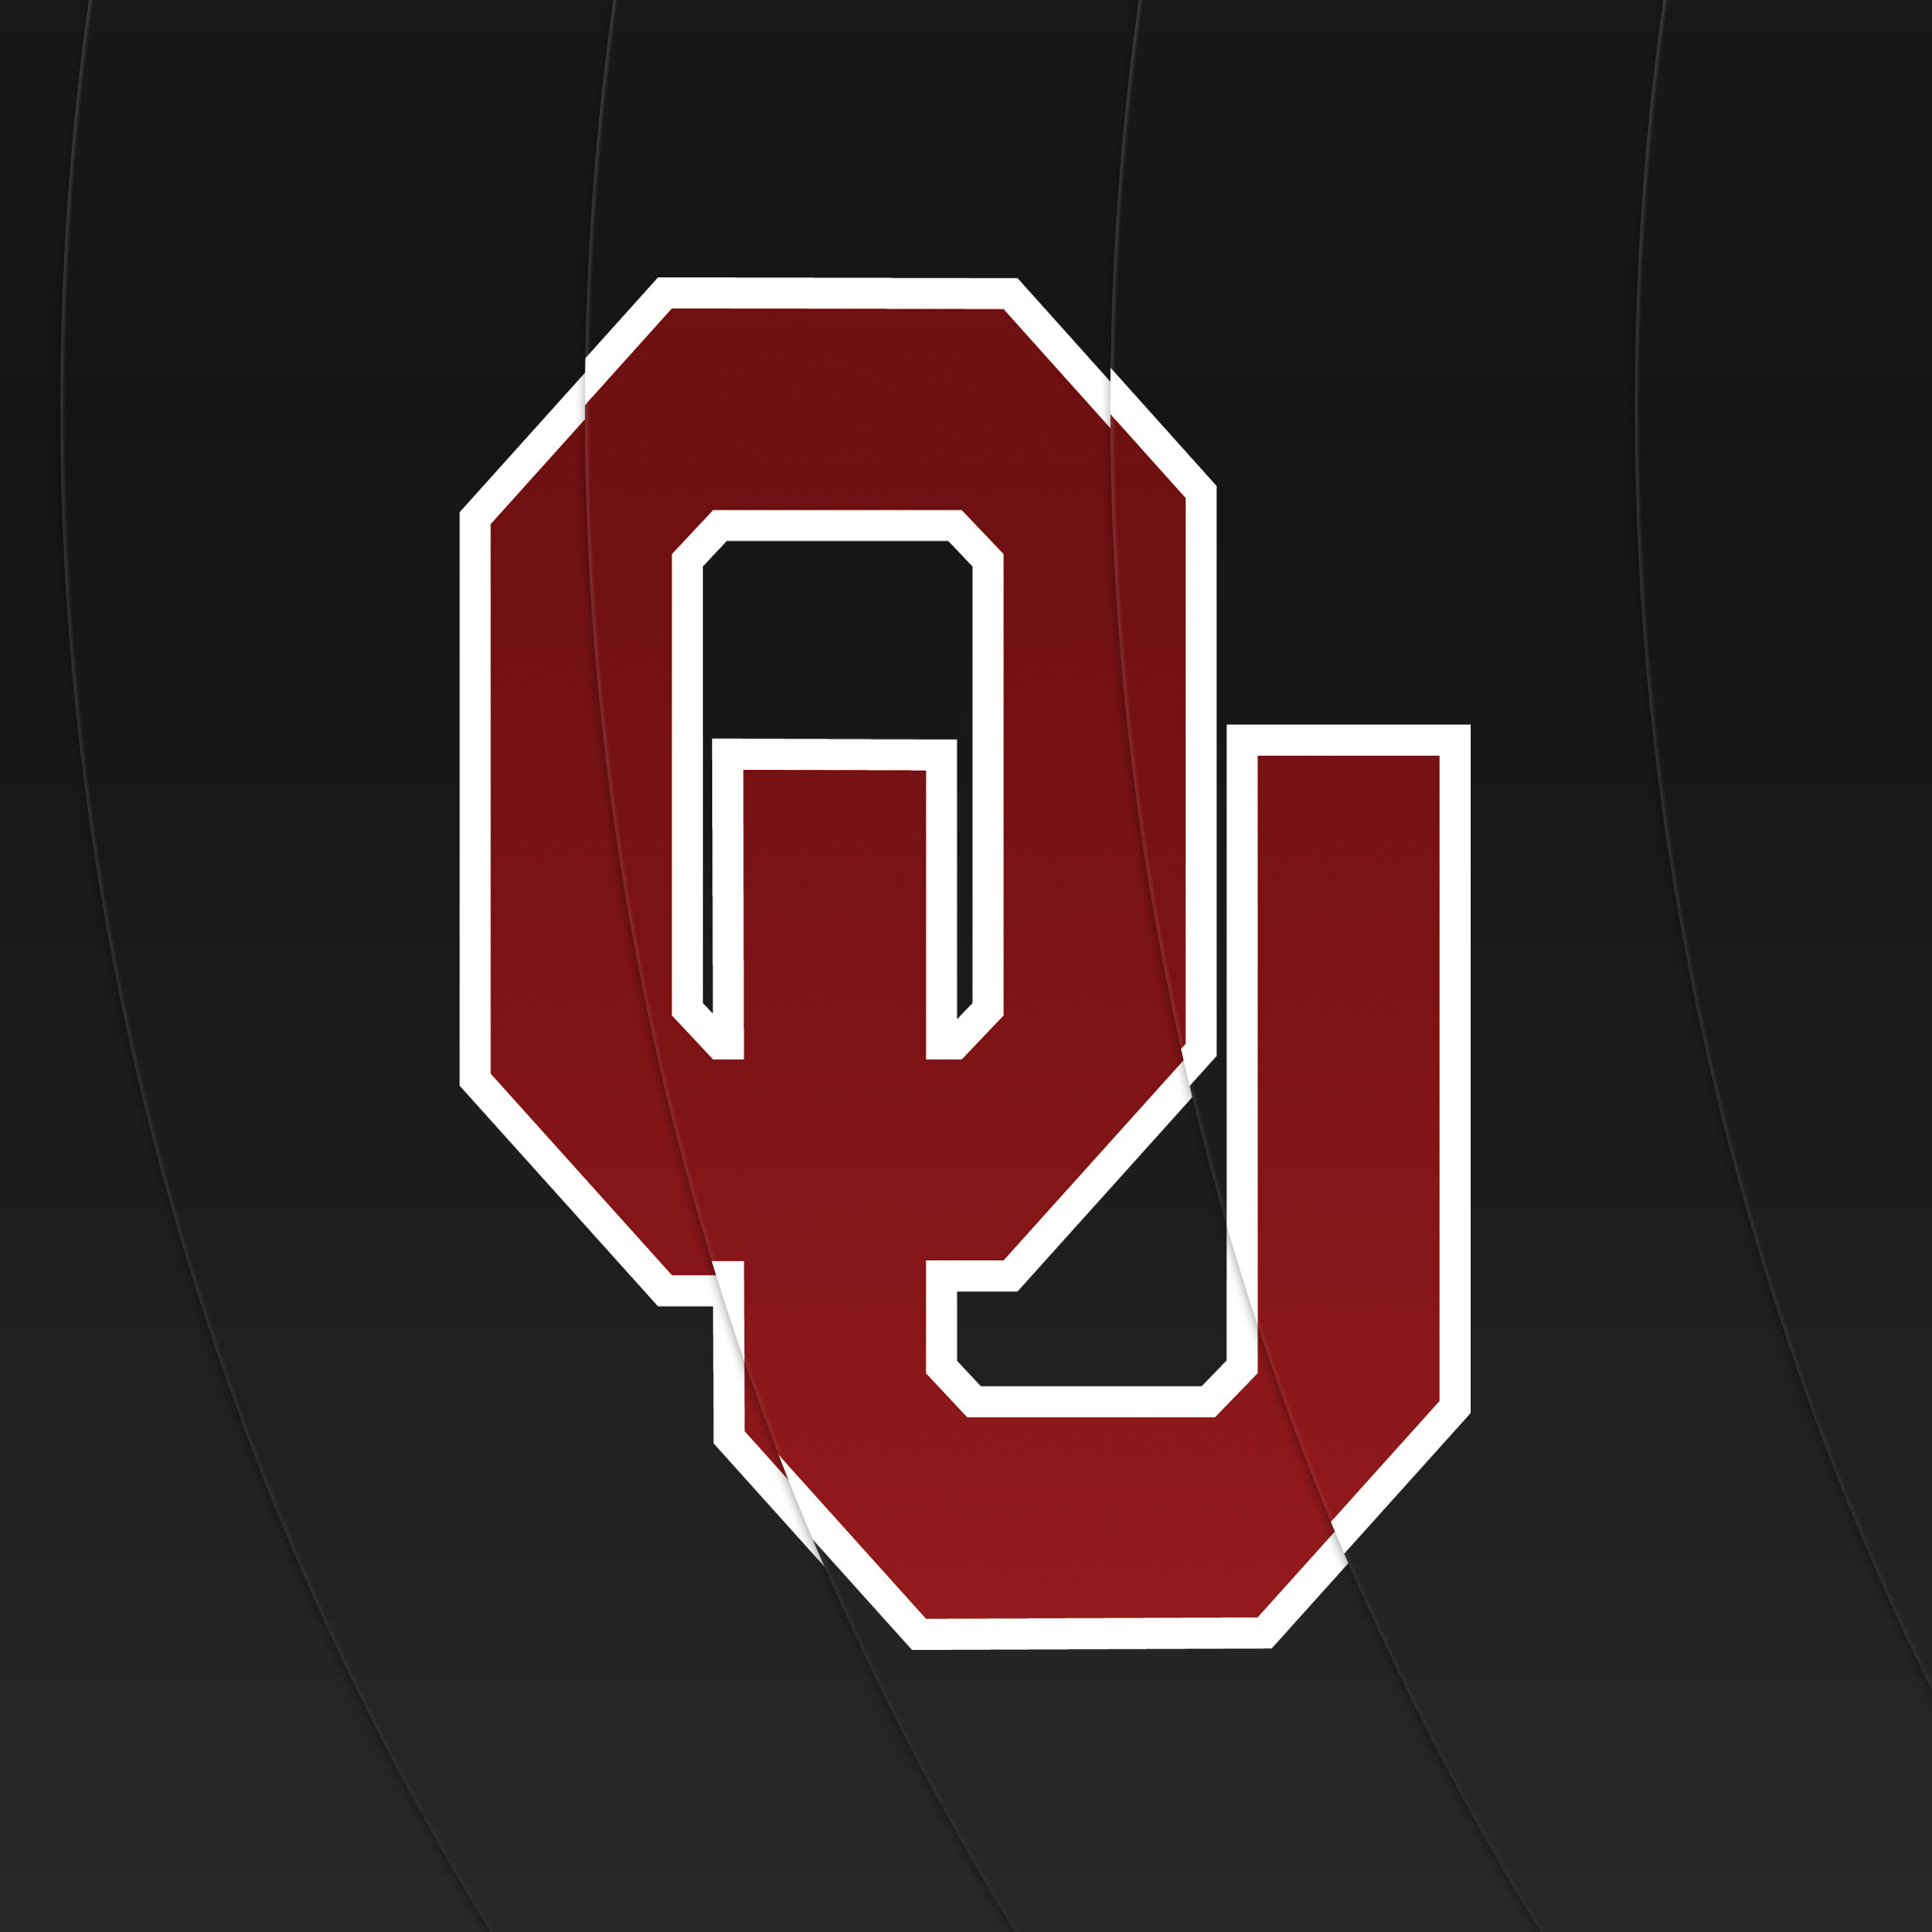 2048x2048 Oklahoma Sooners Backgrounds - Wallpaper Cave ...